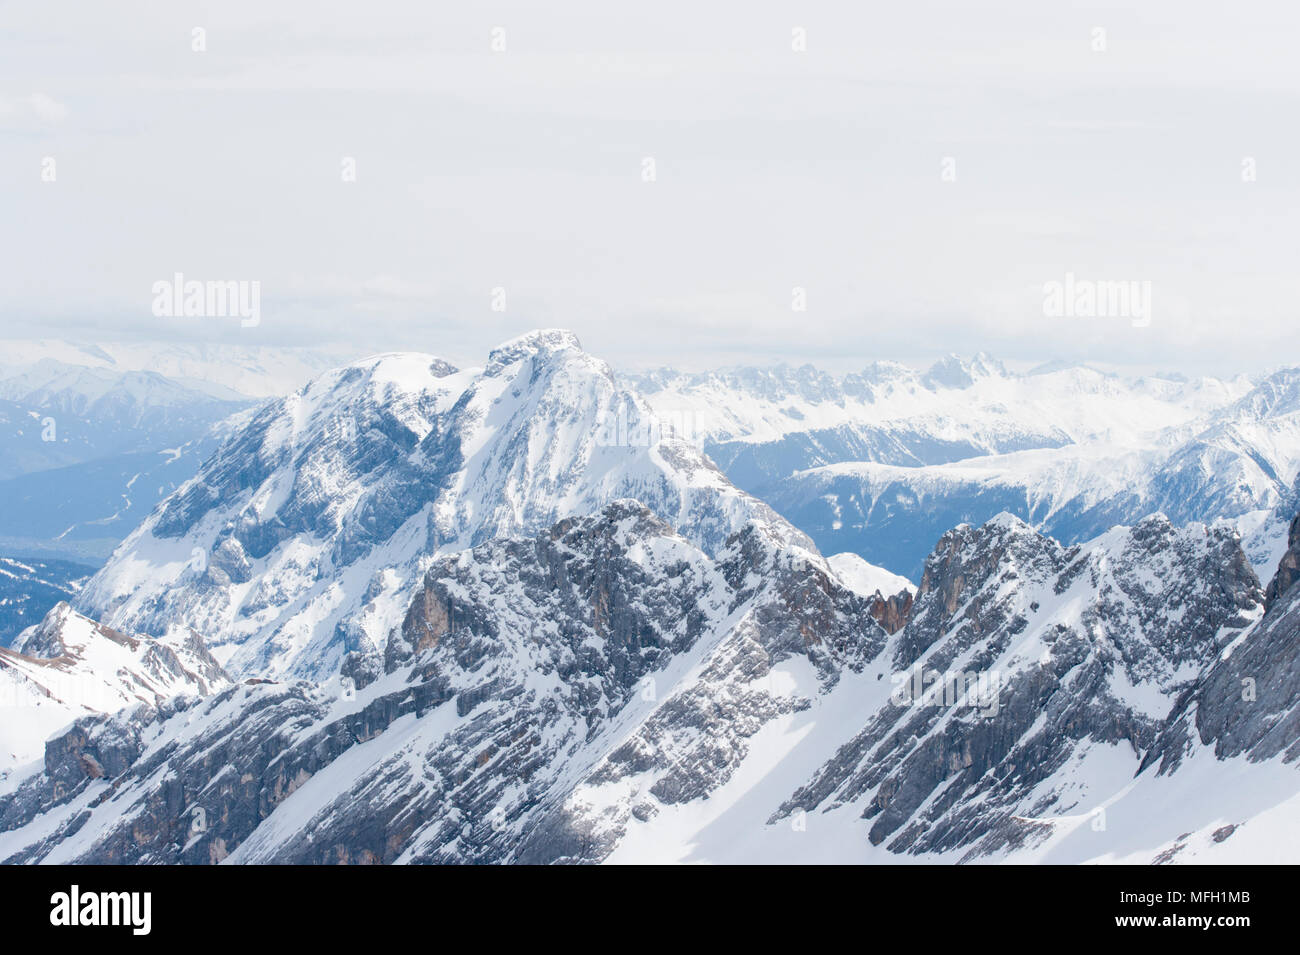 Alps mountain range viewed from Zugspitze, in Eastern Alps, which form part  of the Wetterstein mountains,(German: Wettersteingebirge), Bavaria,Germany  Stock Photo - Alamy